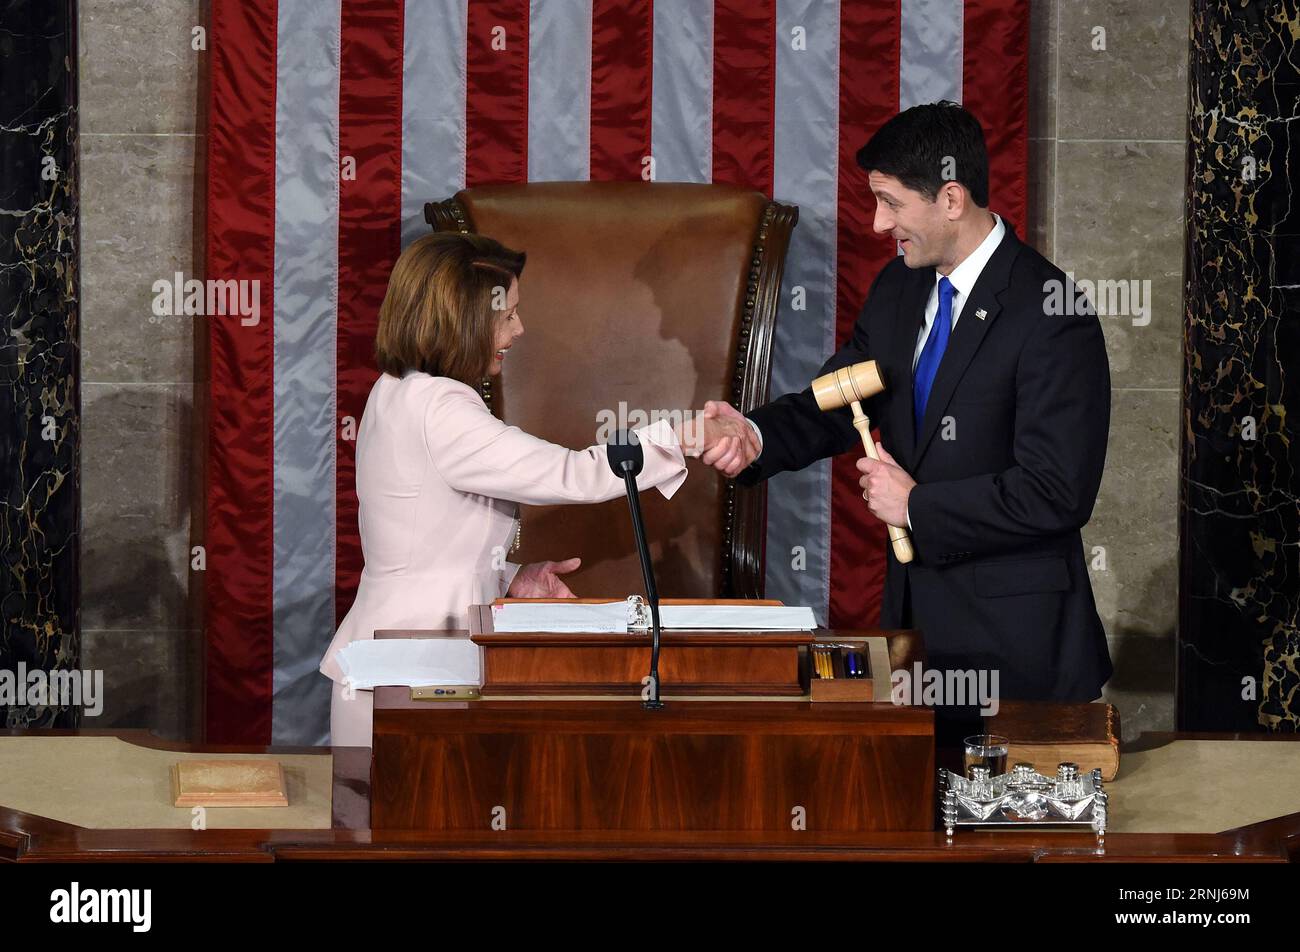 (170103) -- WASHINGTON, Jan. 3, 2017 -- Paul Ryan (R) receives the gavel from House Minority Leader Nancy Pelosi after being re-elected as House Speaker during the opening of the 115th U.S. Congress on Capitol Hill in Washington D.C., the United States, on Jan. 3, 2017. The 115th U.S. Congress convenes on Tuesday with Republican Paul Ryan re-elected as House Speaker as expected while outgoing Vice President Joe Biden presides over the old Senate chamber for the last time. ) U.S.-WASHINGTON D.C.-HOUSE SPEAKER-PAUL RYAN YinxBogu PUBLICATIONxNOTxINxCHN   Washington Jan 3 2017 Paul Ryan r receives Stock Photo